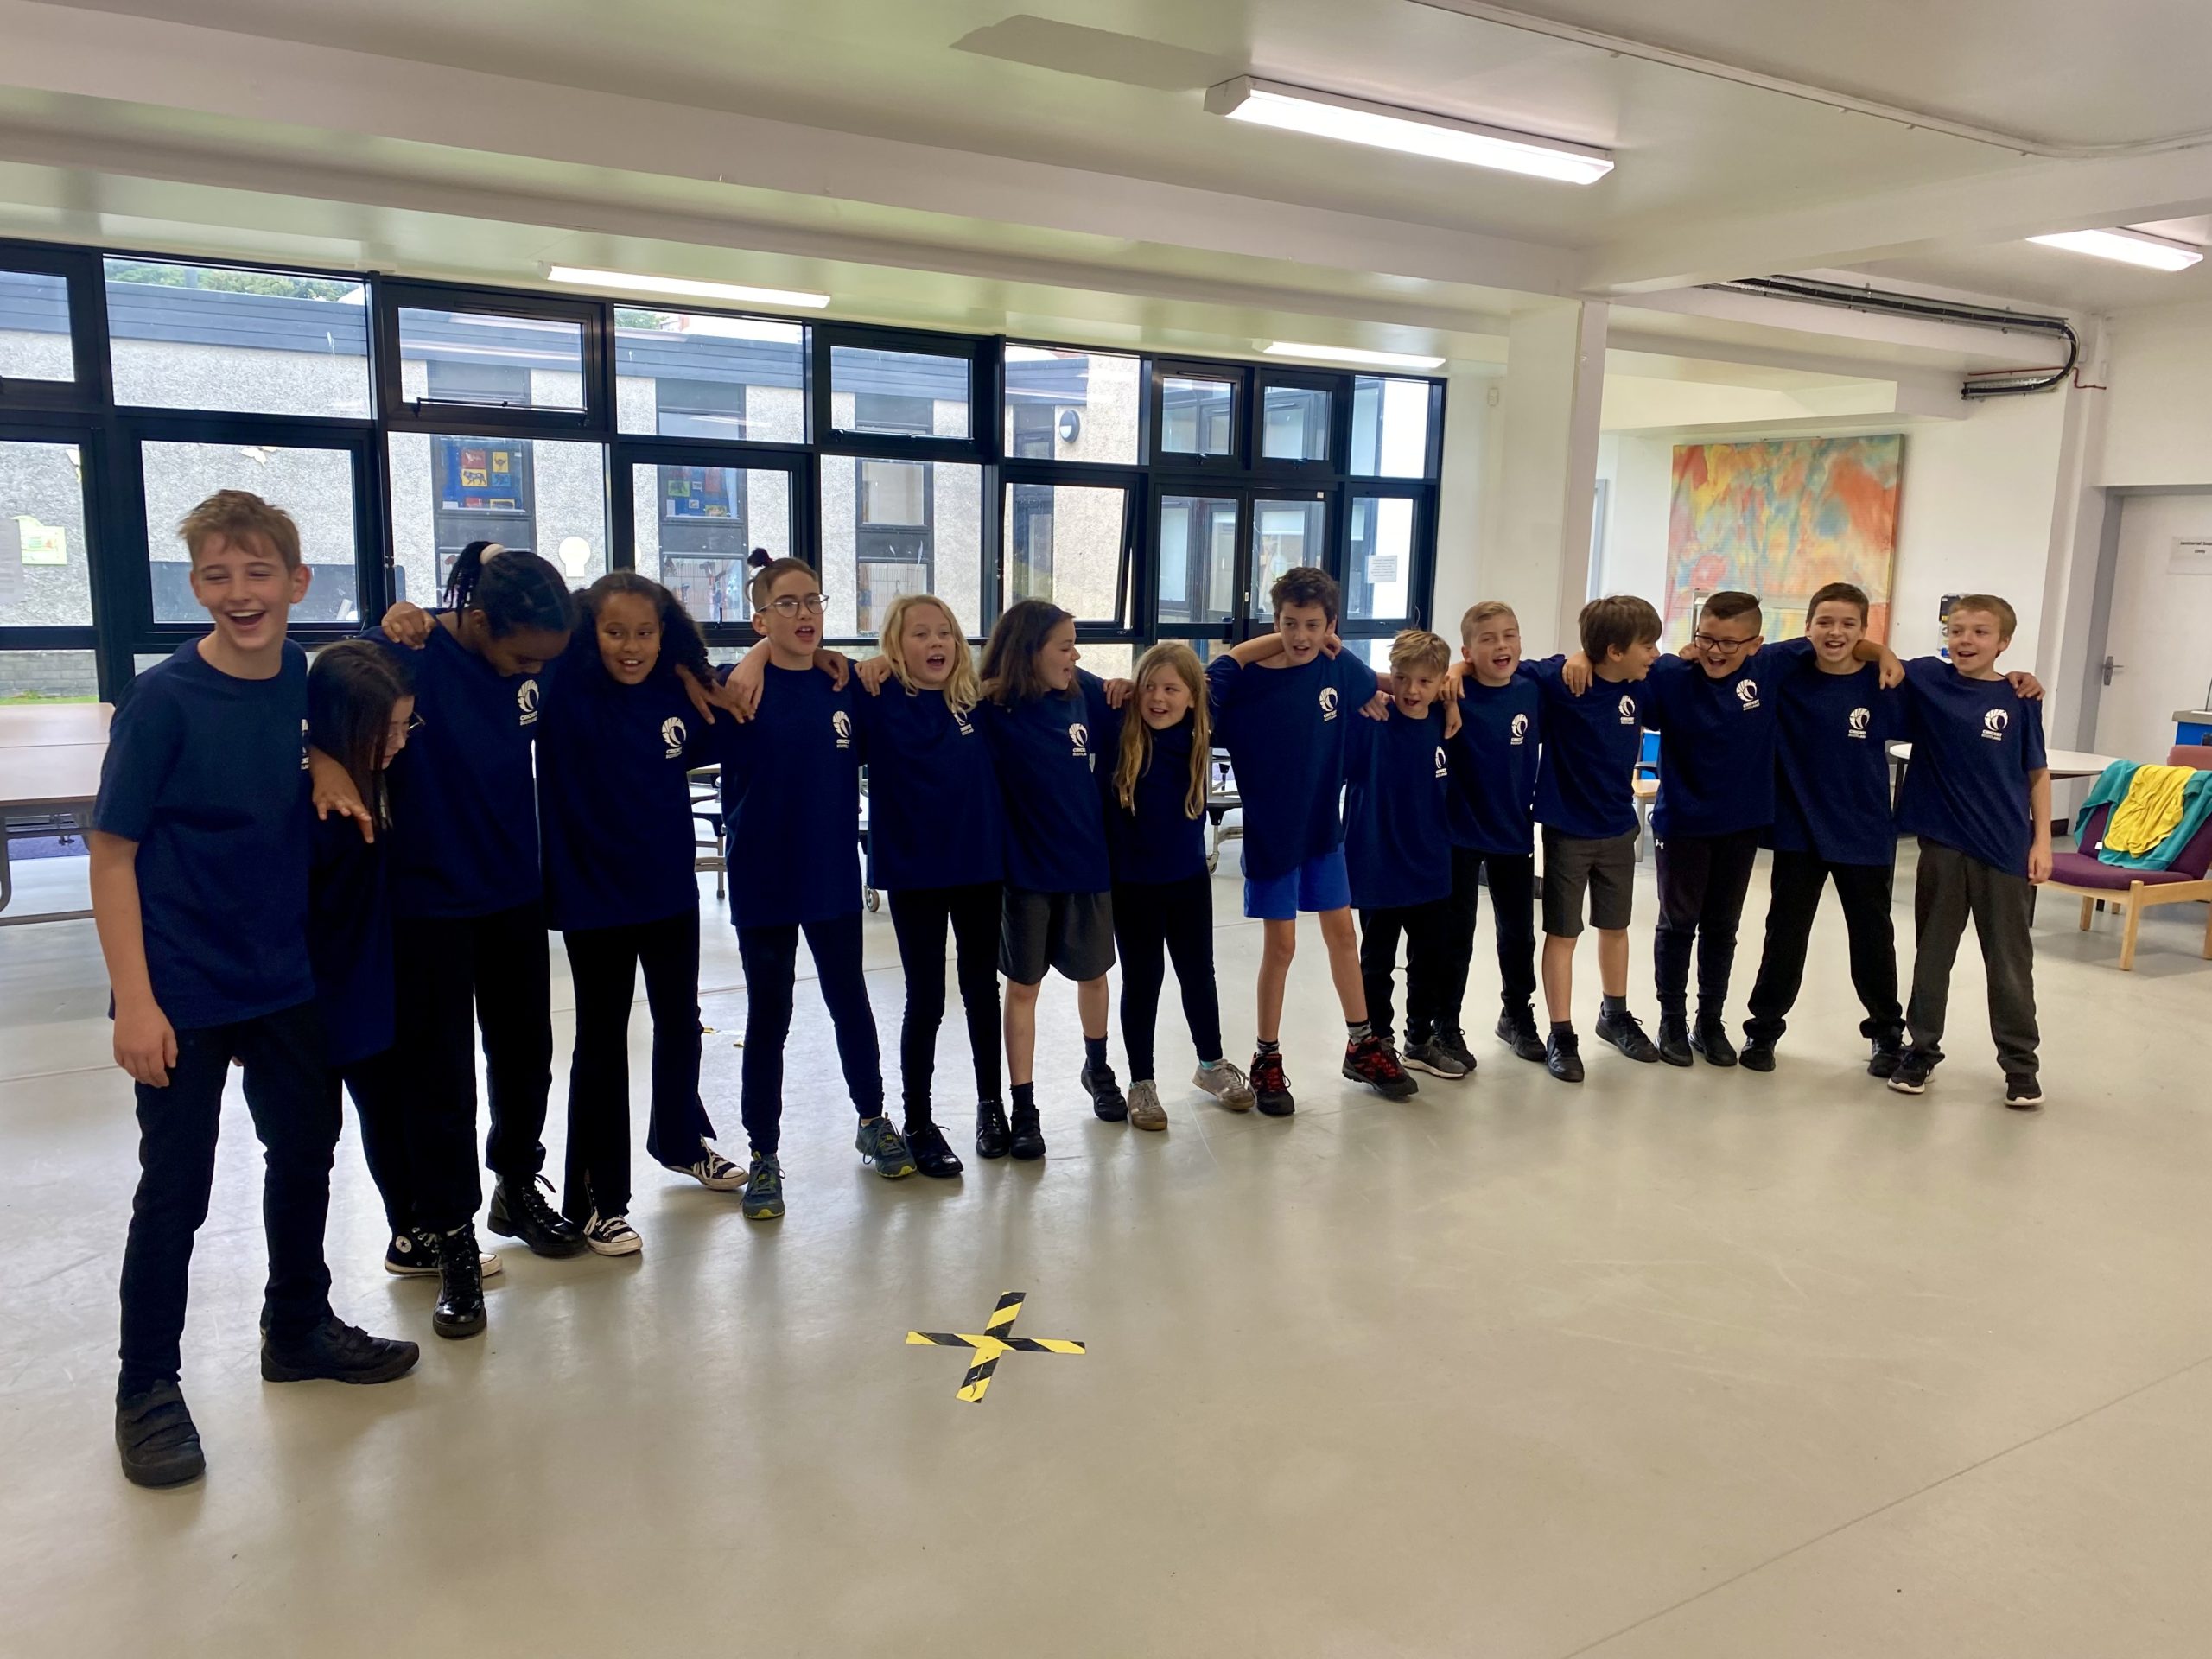 Trinity Primary pupils shine during T20 World Cup Anthem Ceremony